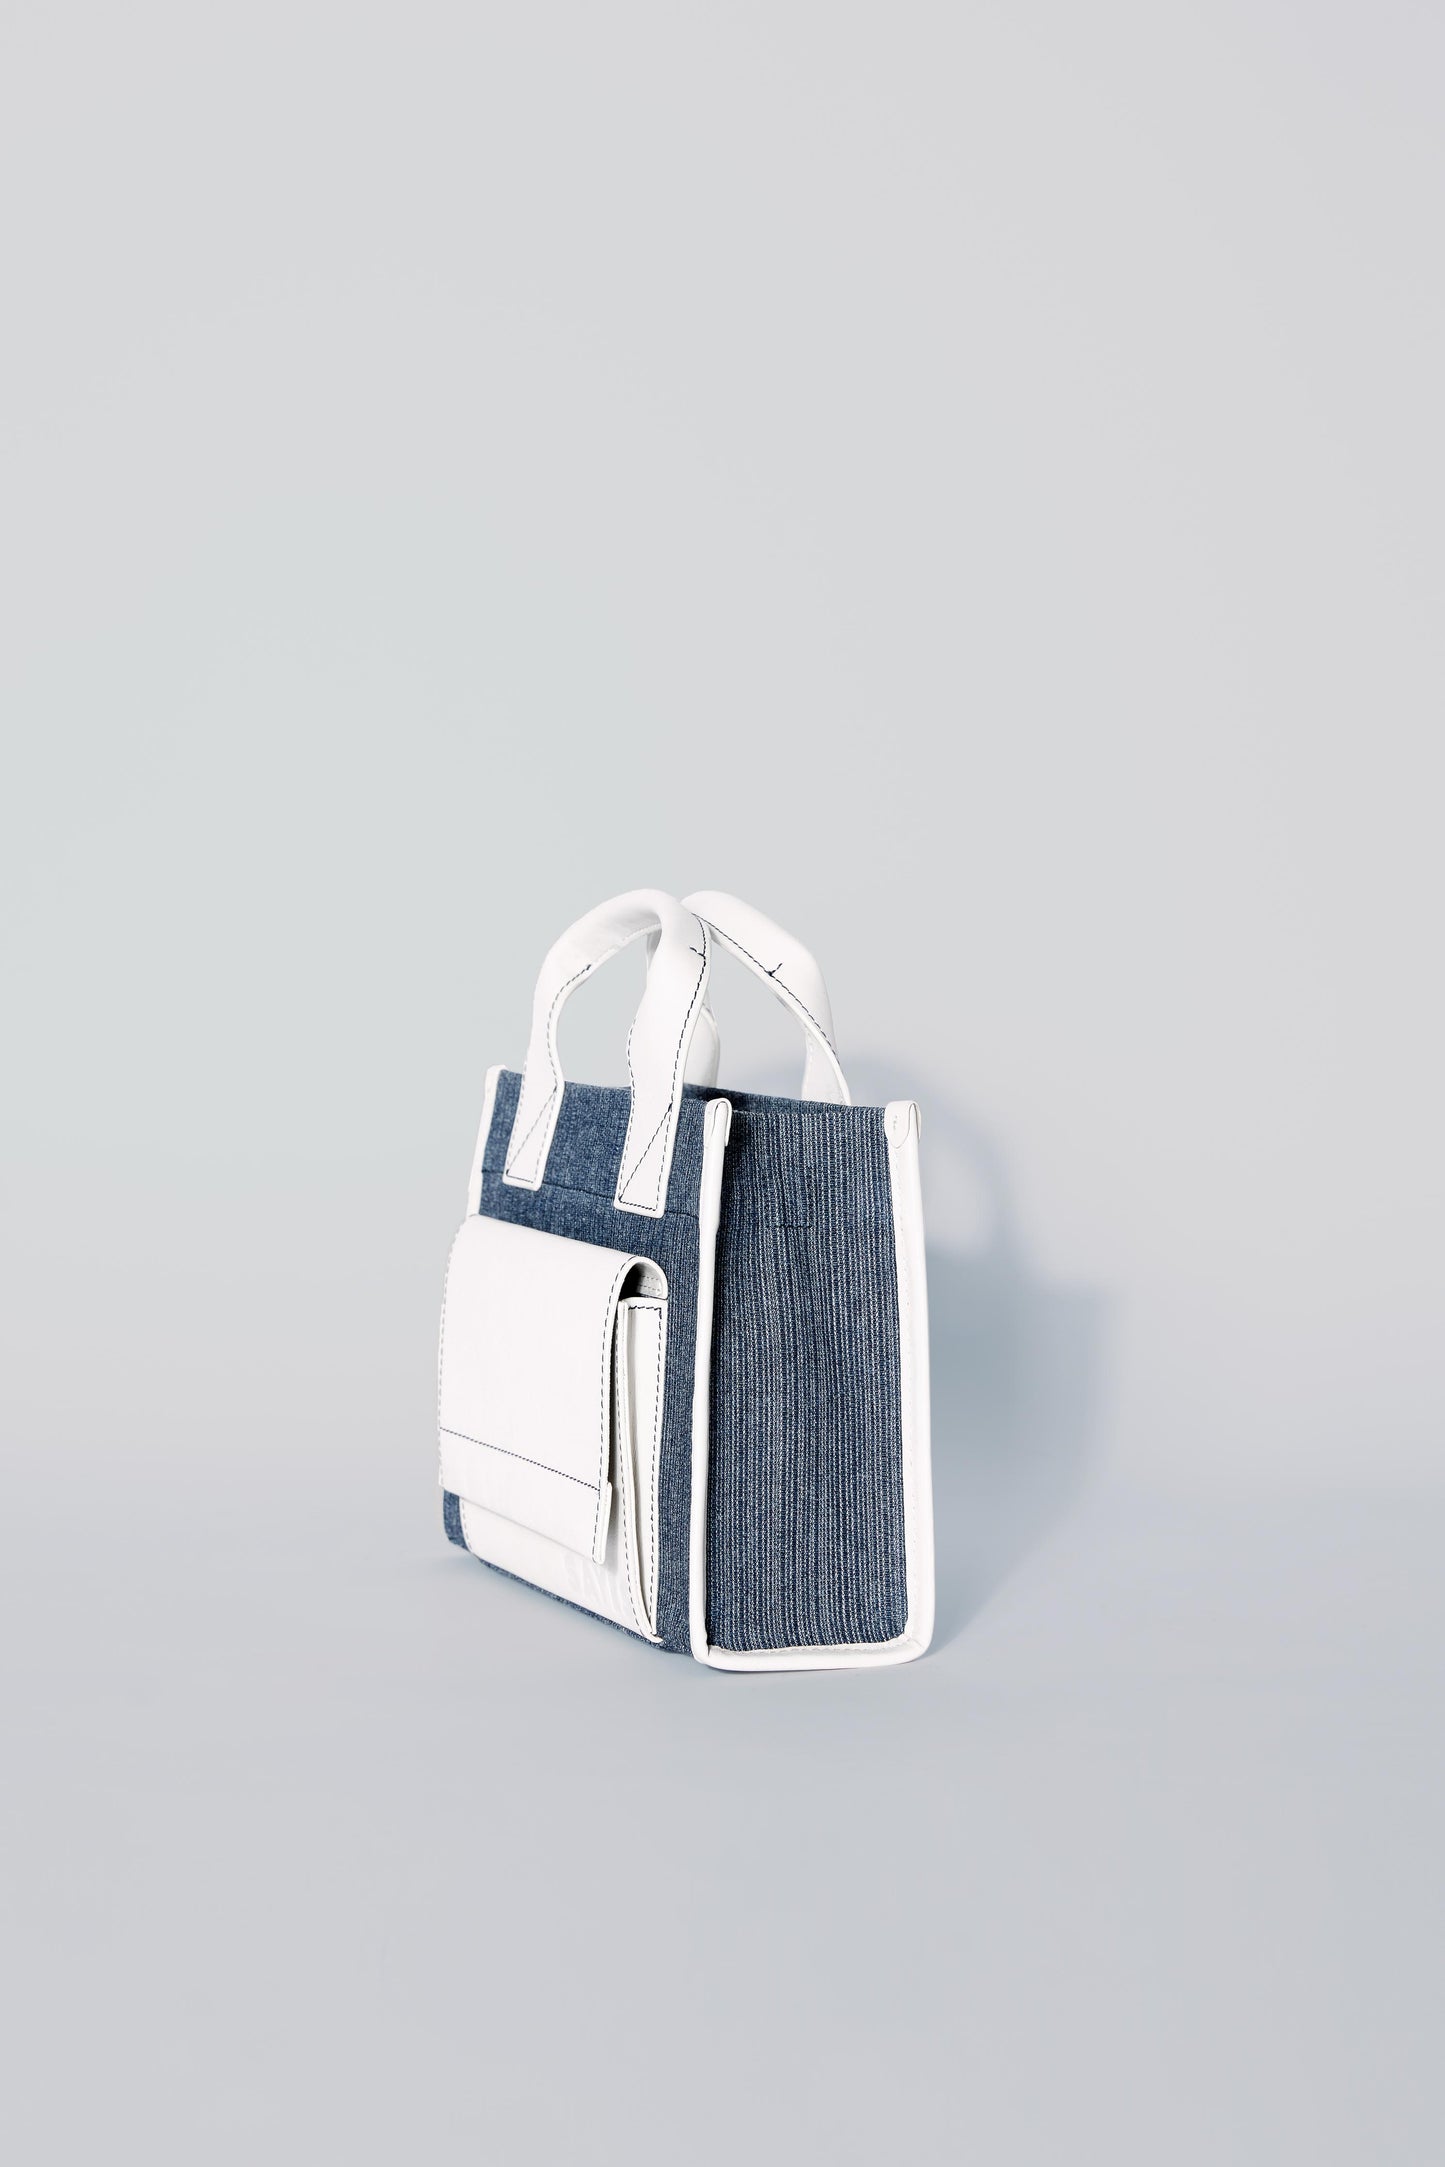 STITCHED POCKET MINI TOTE IN MARINE AND OFF-WHITE